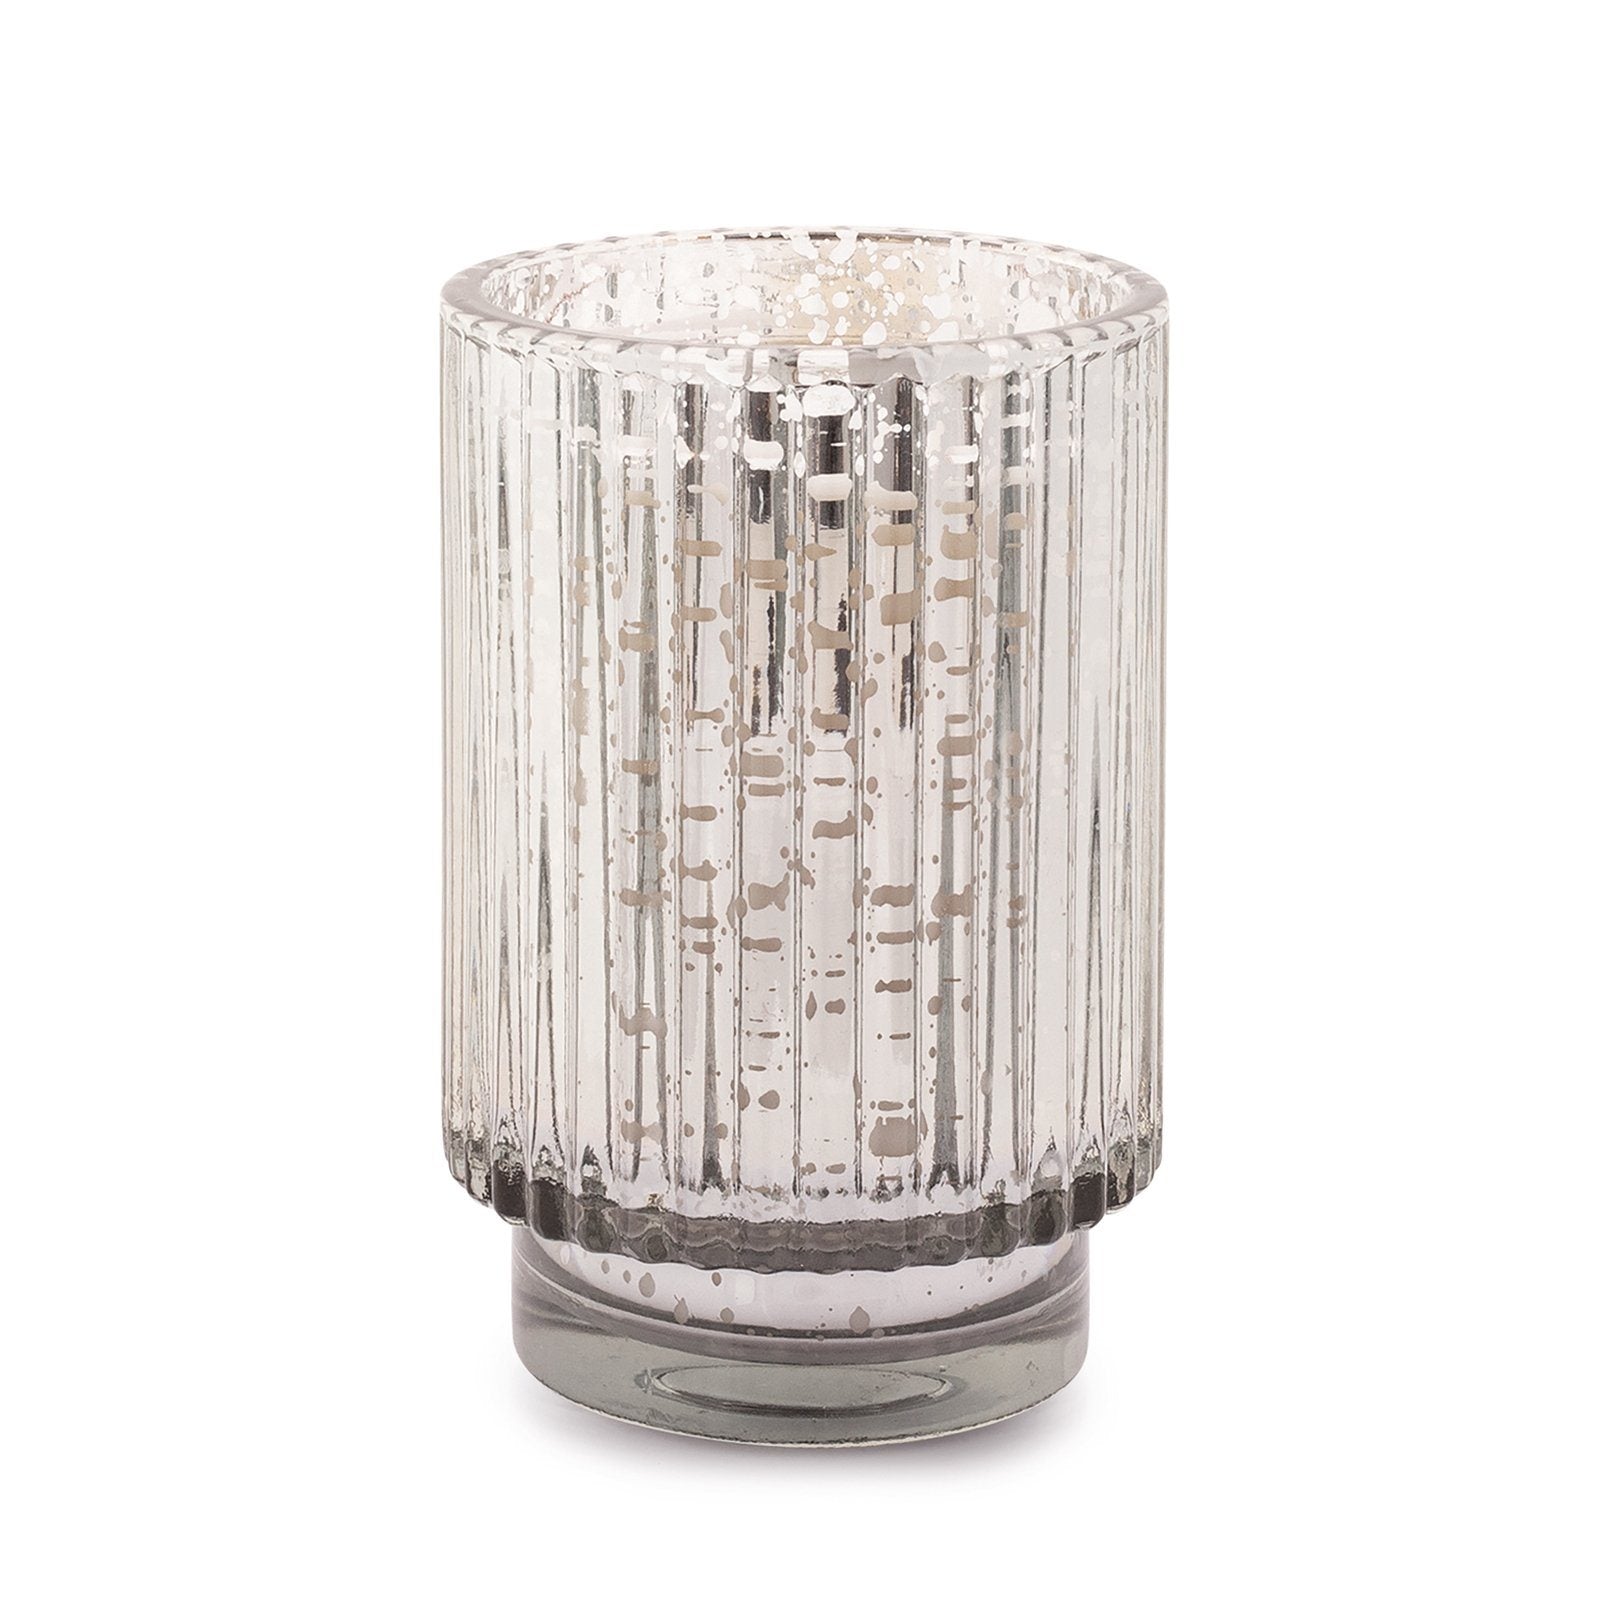 12 oz. tall silver/clear glass vessel that gives off a disco ball-like glow when lit; white wax and one cotton wick